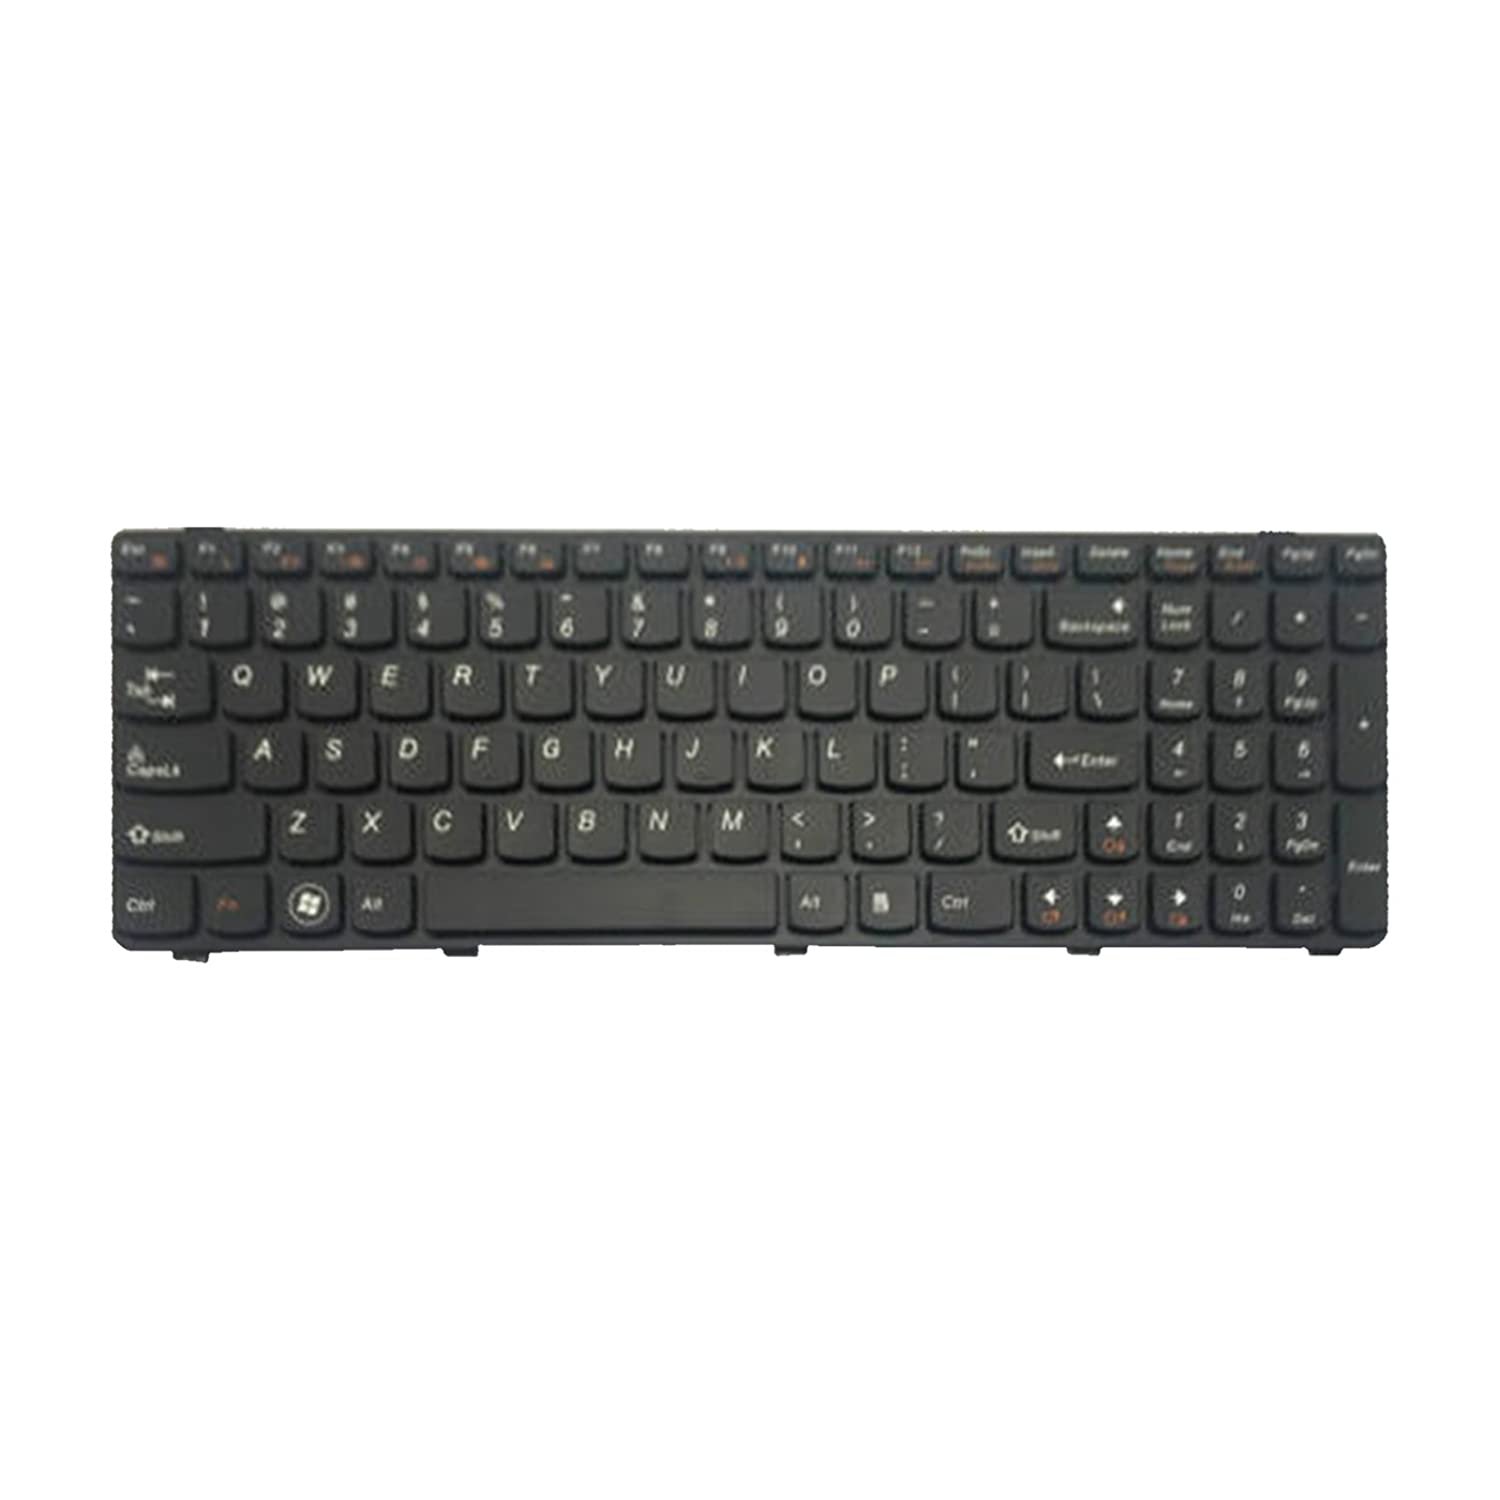 You are currently viewing DELL Laptop Keyboard at Bhandup, Mumbai